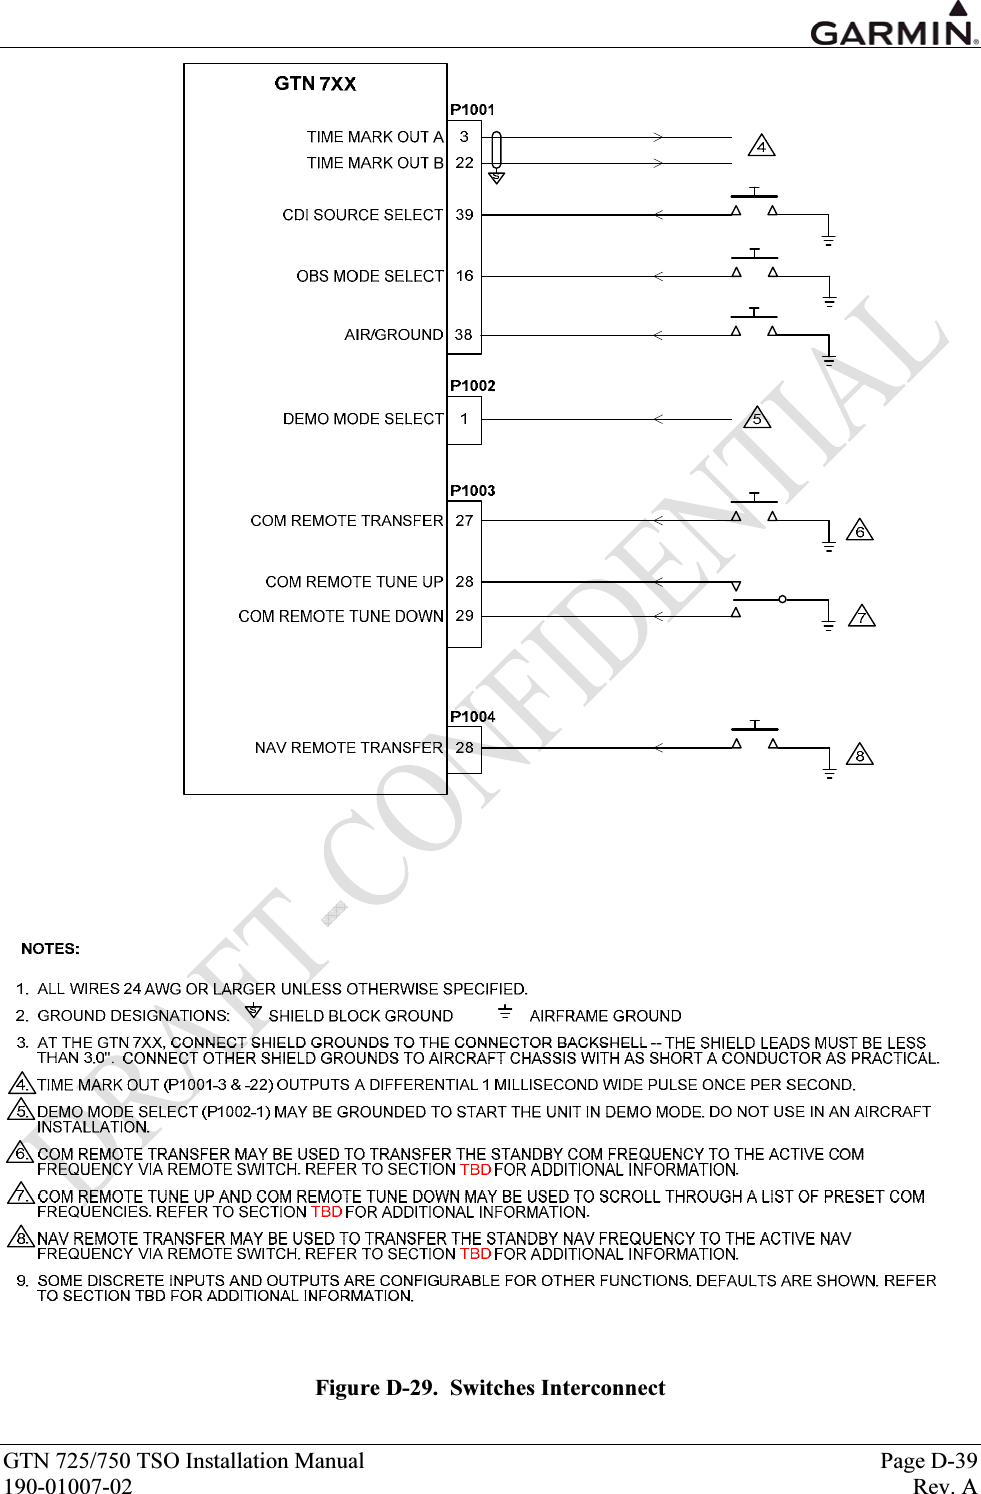  GTN 725/750 TSO Installation Manual  Page D-39 190-01007-02  Rev. A  Figure D-29.  Switches Interconnect 